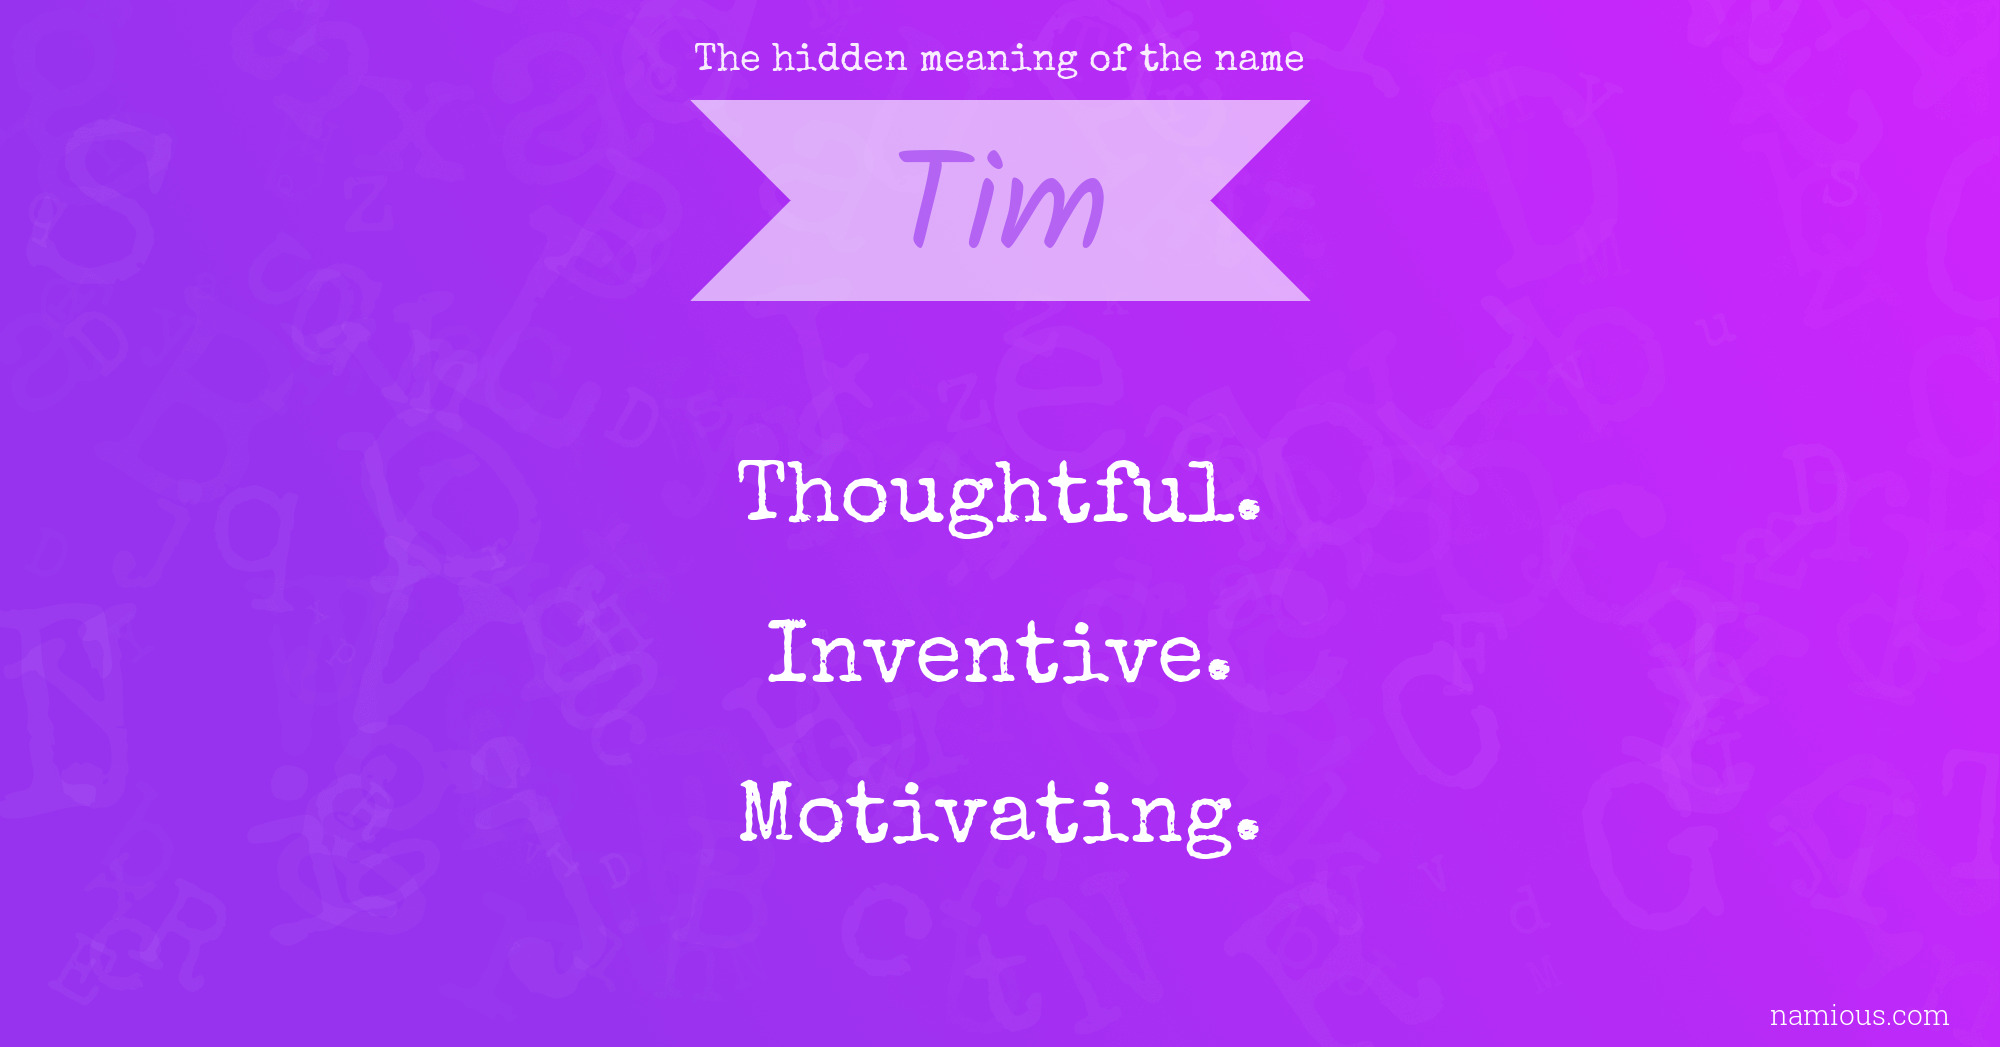 The hidden meaning of the name Tim